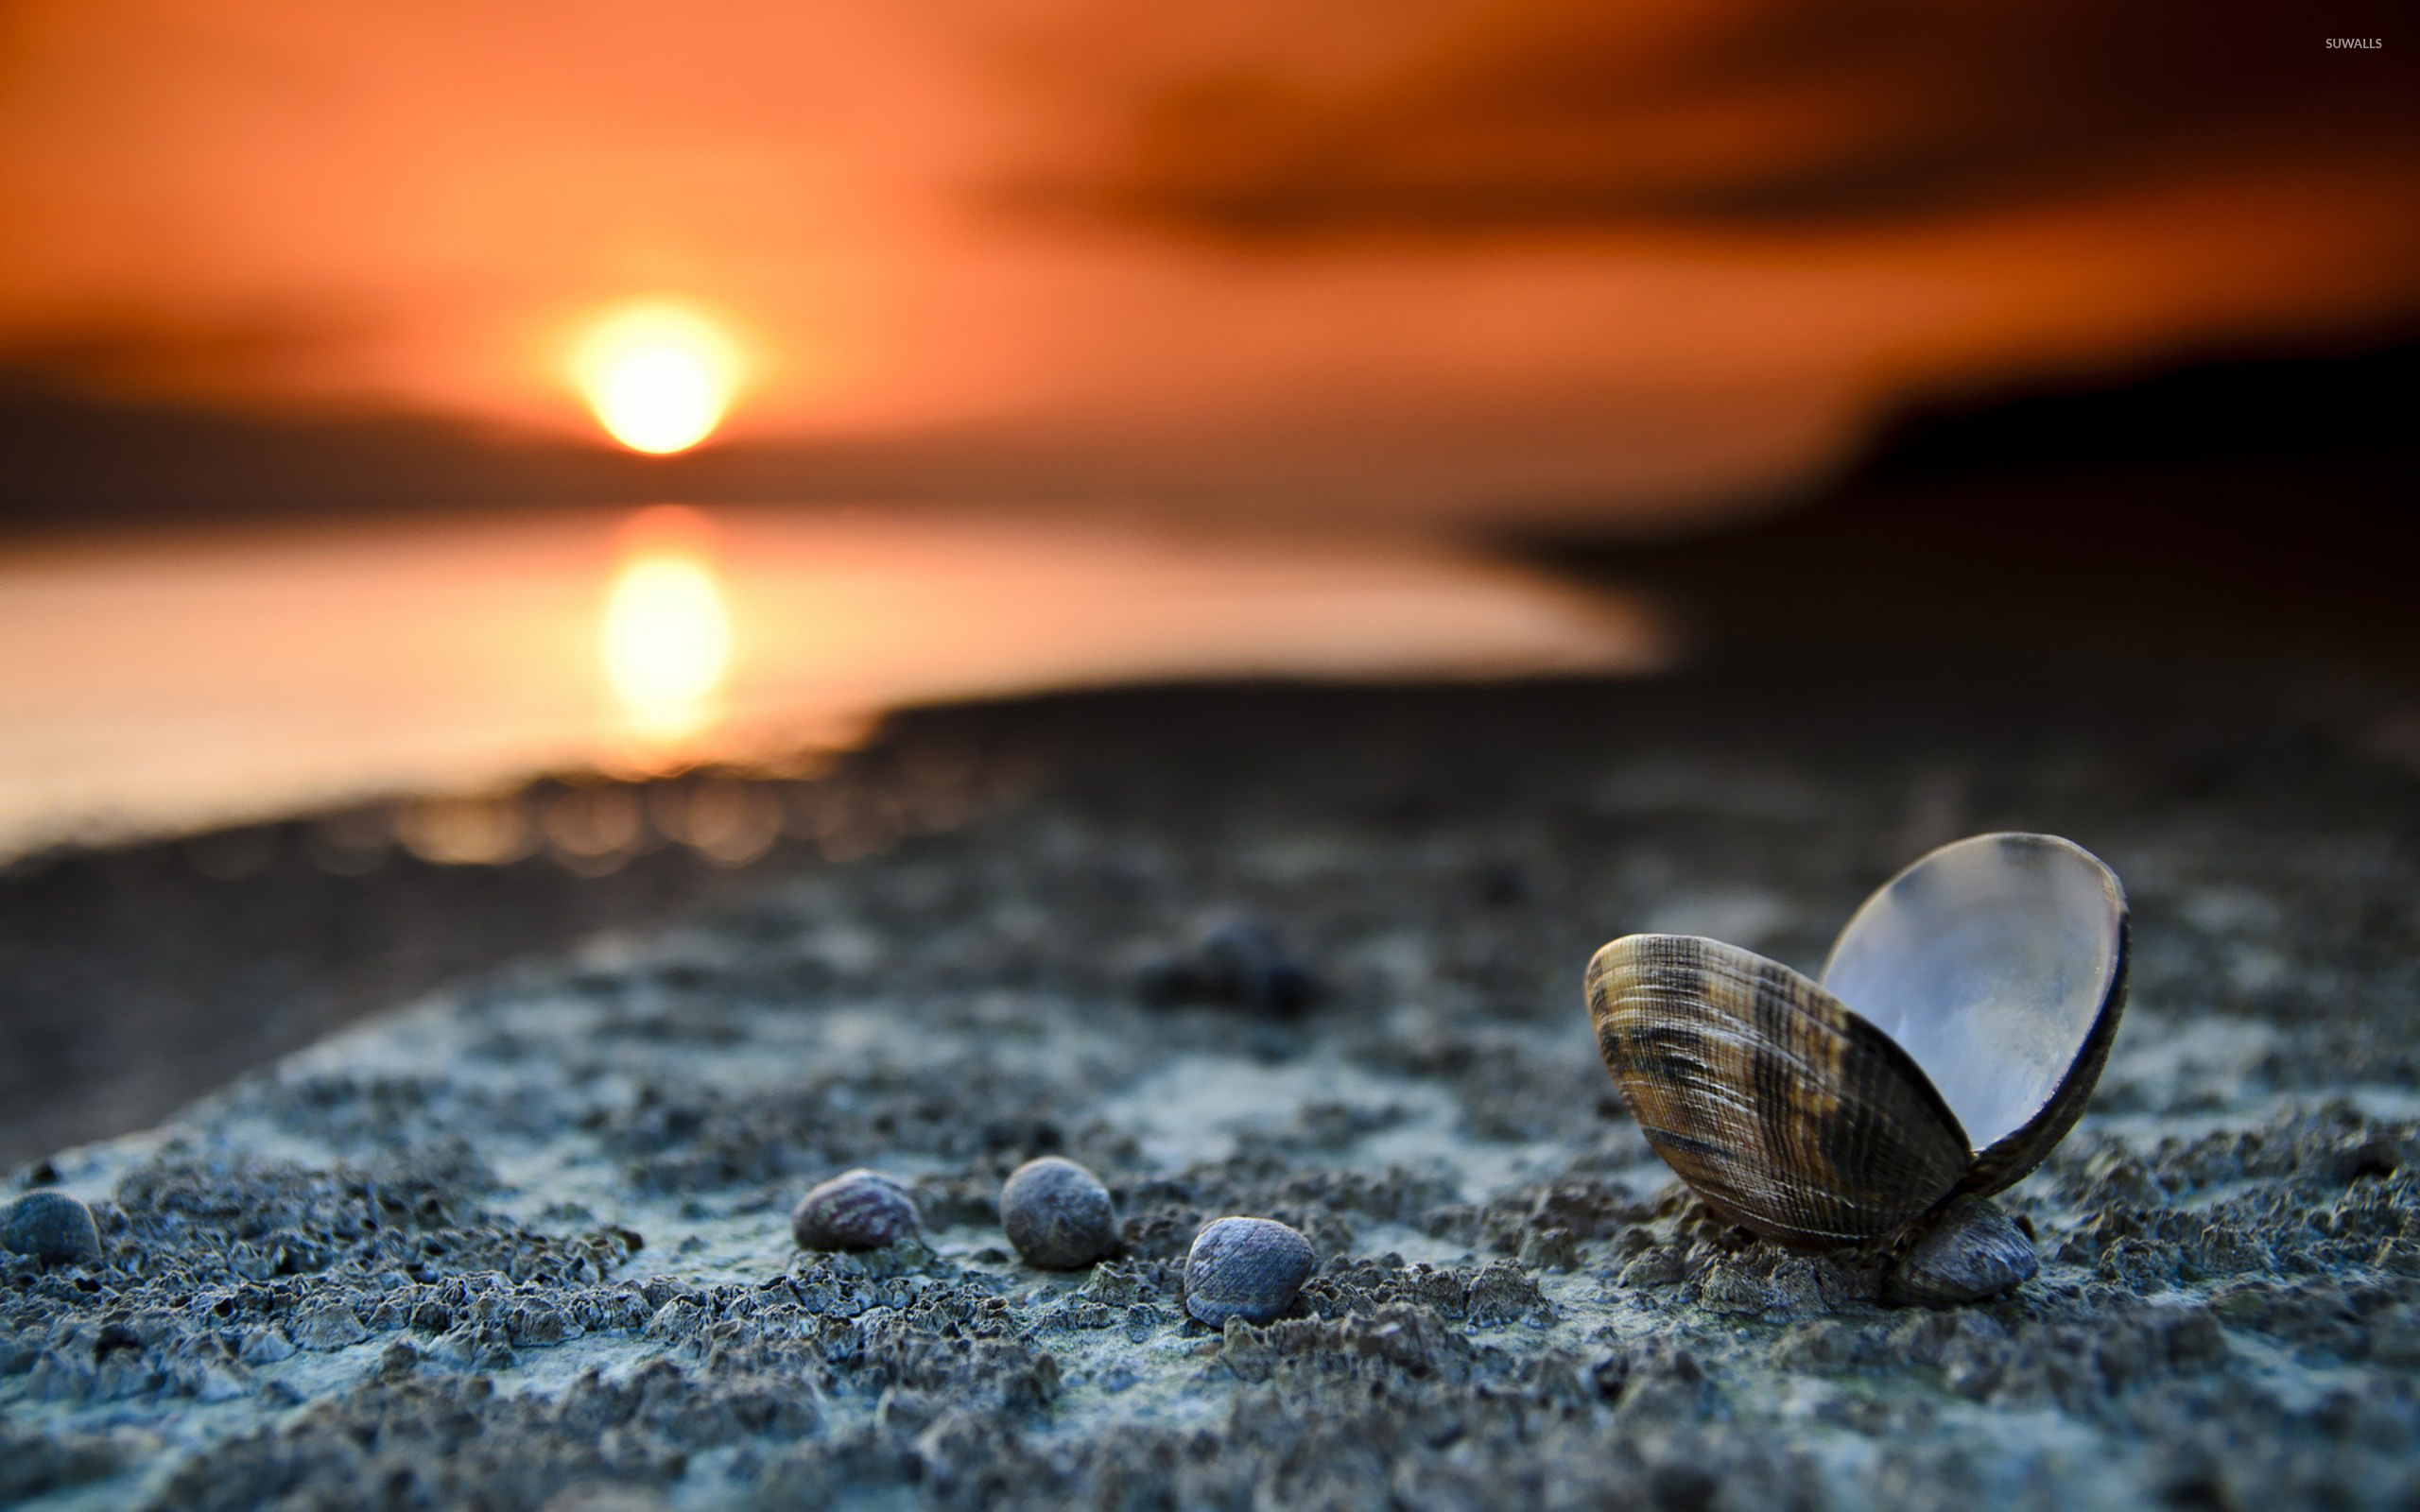 Shell on the beach wallpaper - Photography wallpapers - #18471